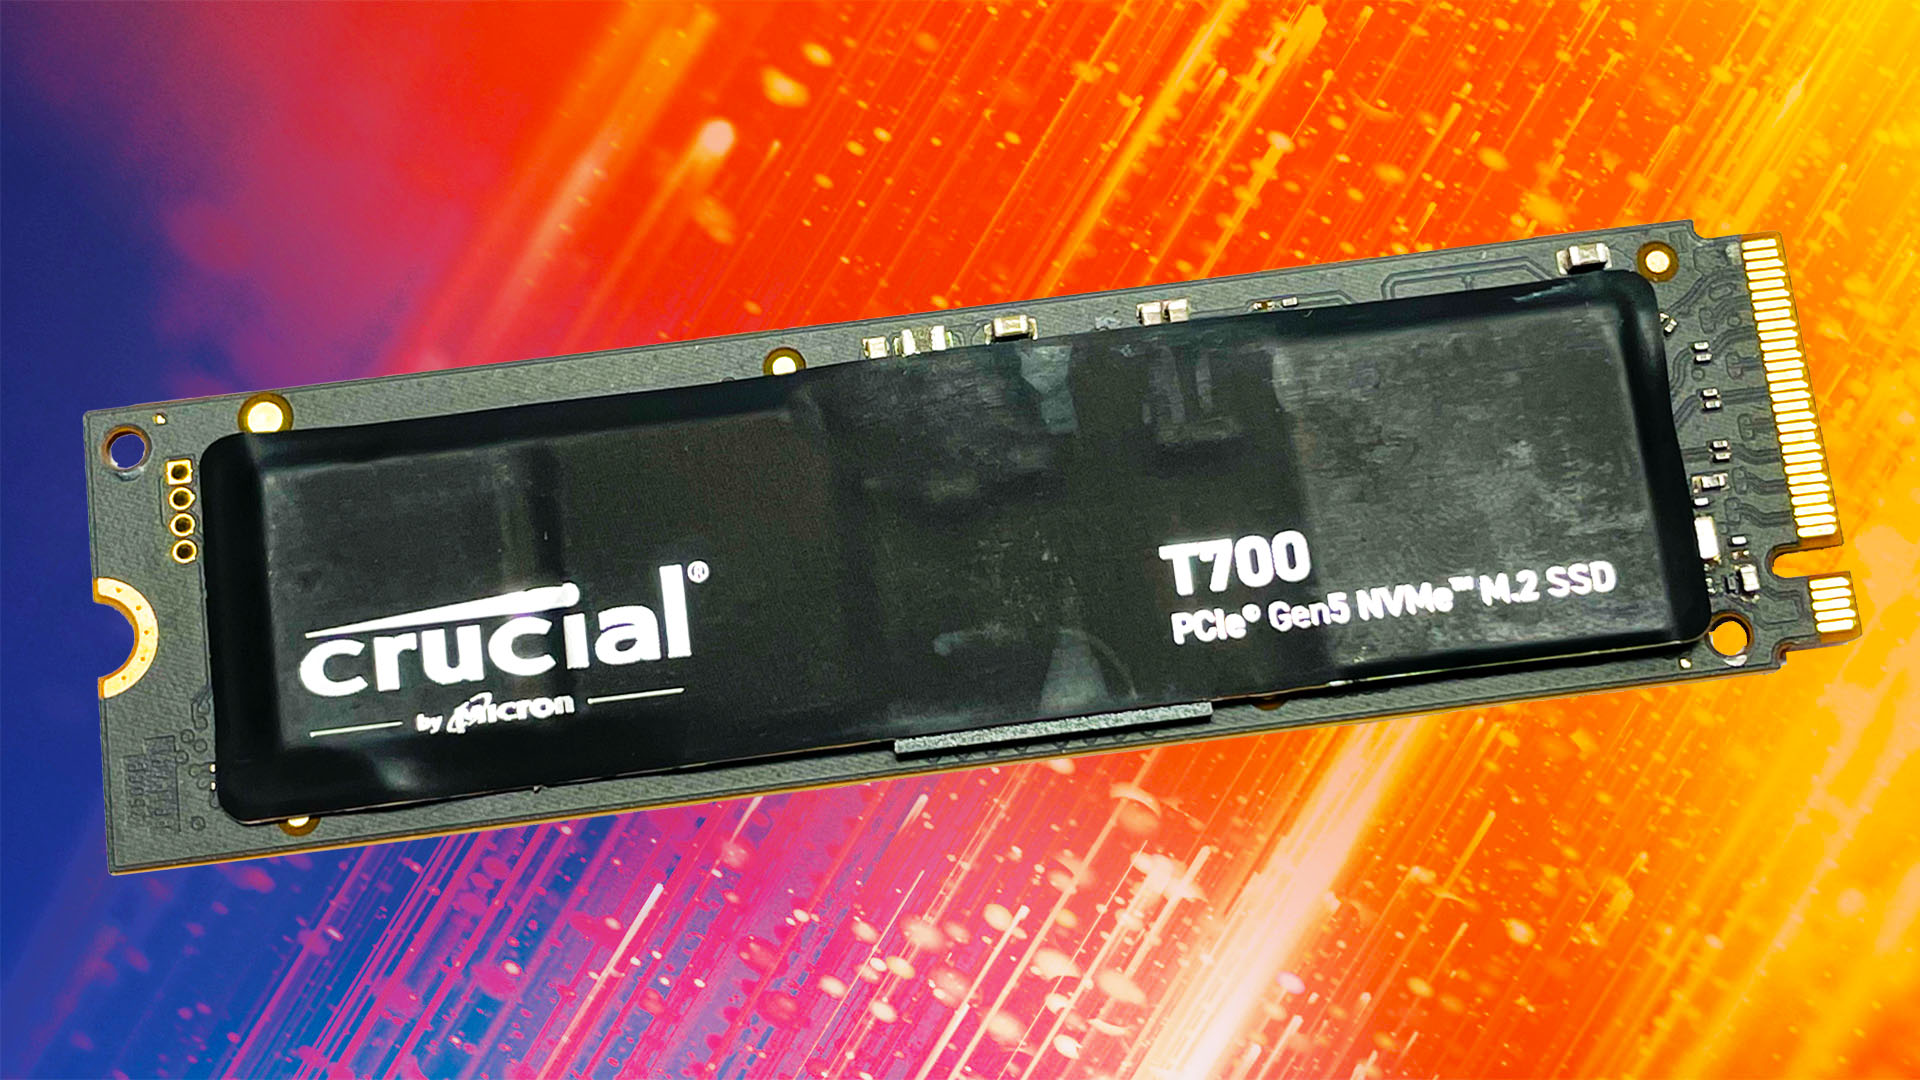 Crucial T700 Review: A Hot PCIe 5.0 SSD